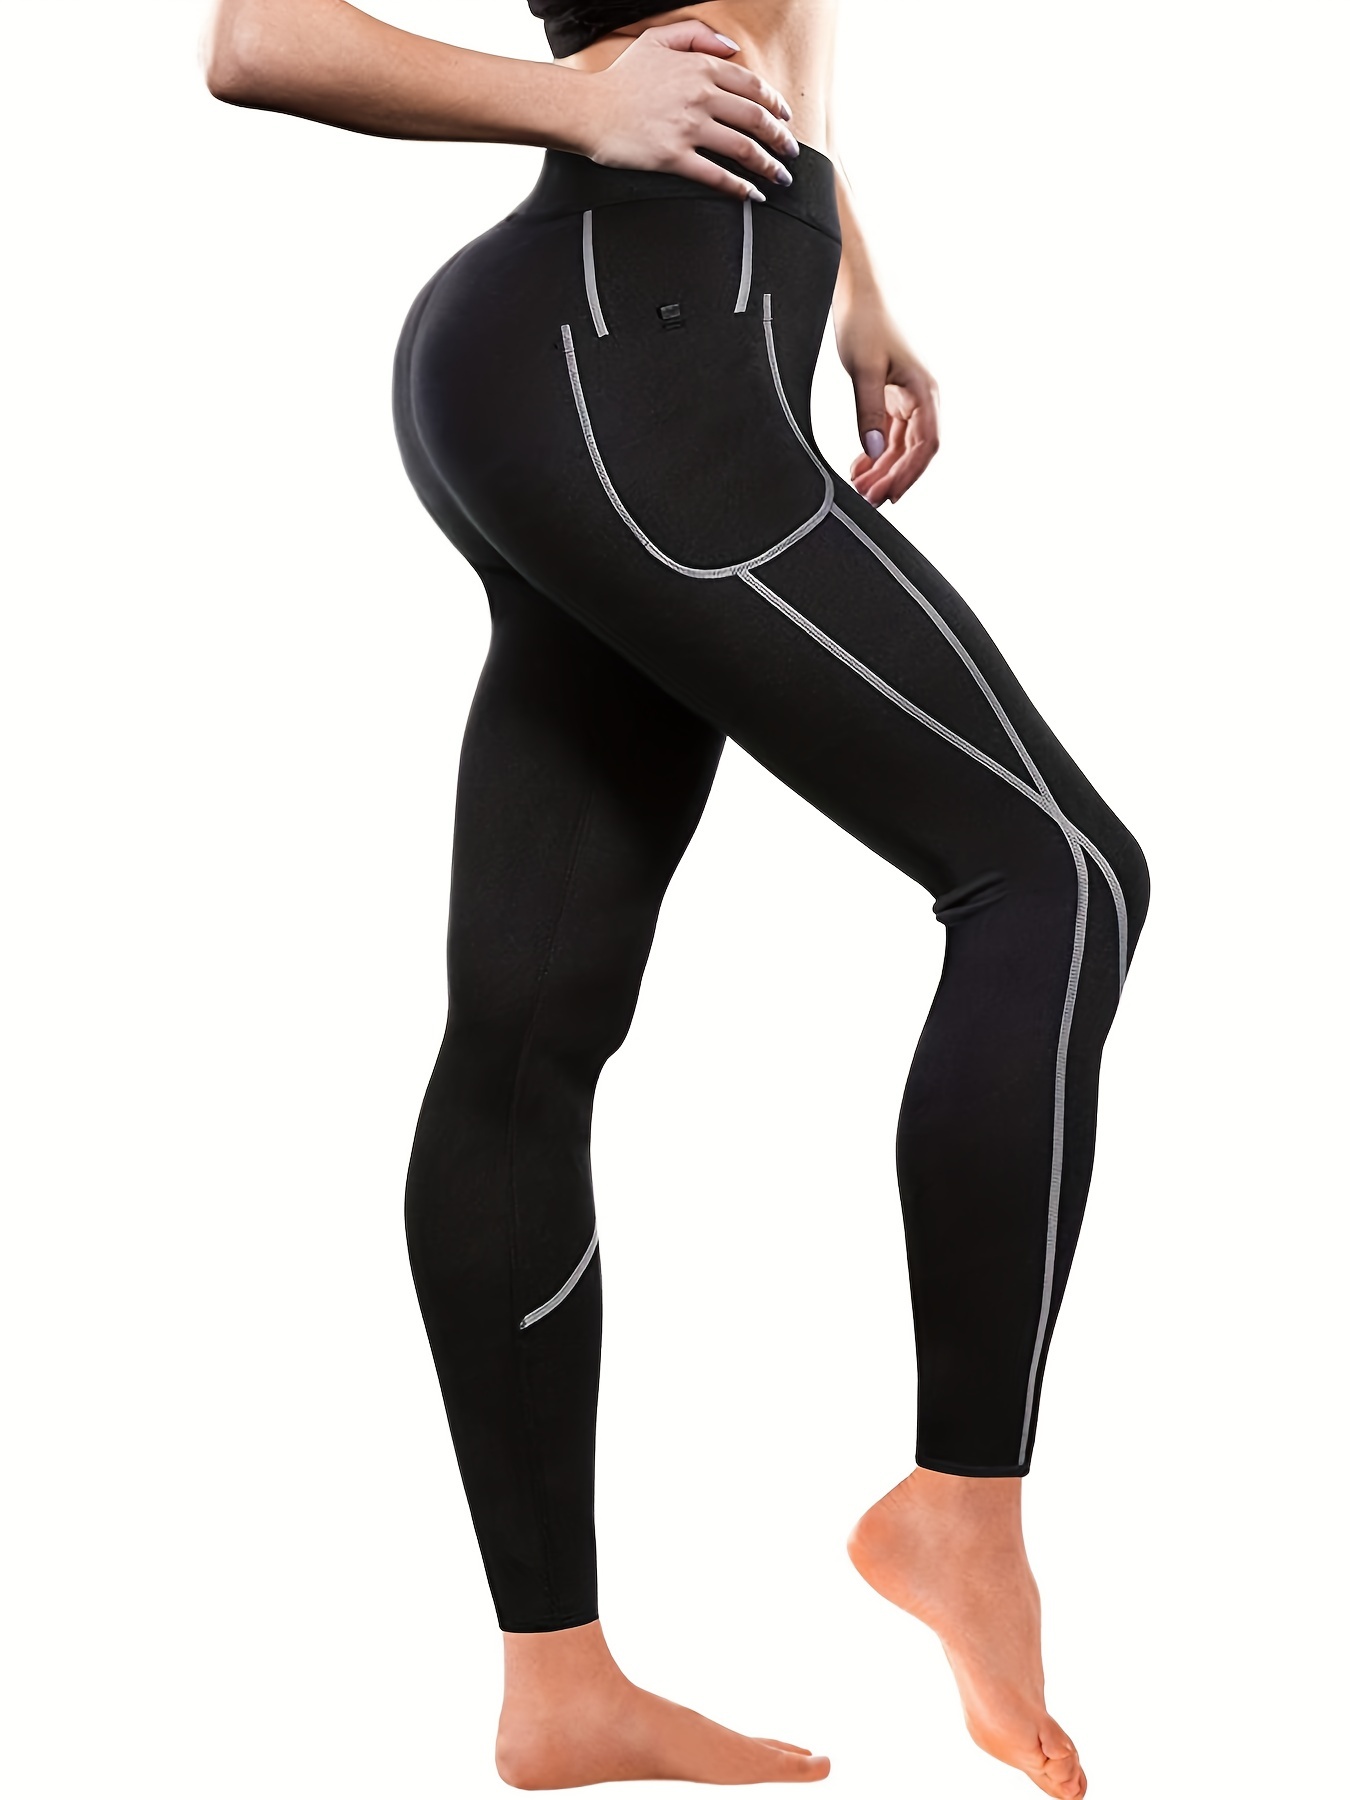 Black Thermal Sweat Absorption Sauna Leggings, Patched Pockets Body Shaped  Slimming Sports Pants, Women's Activewear